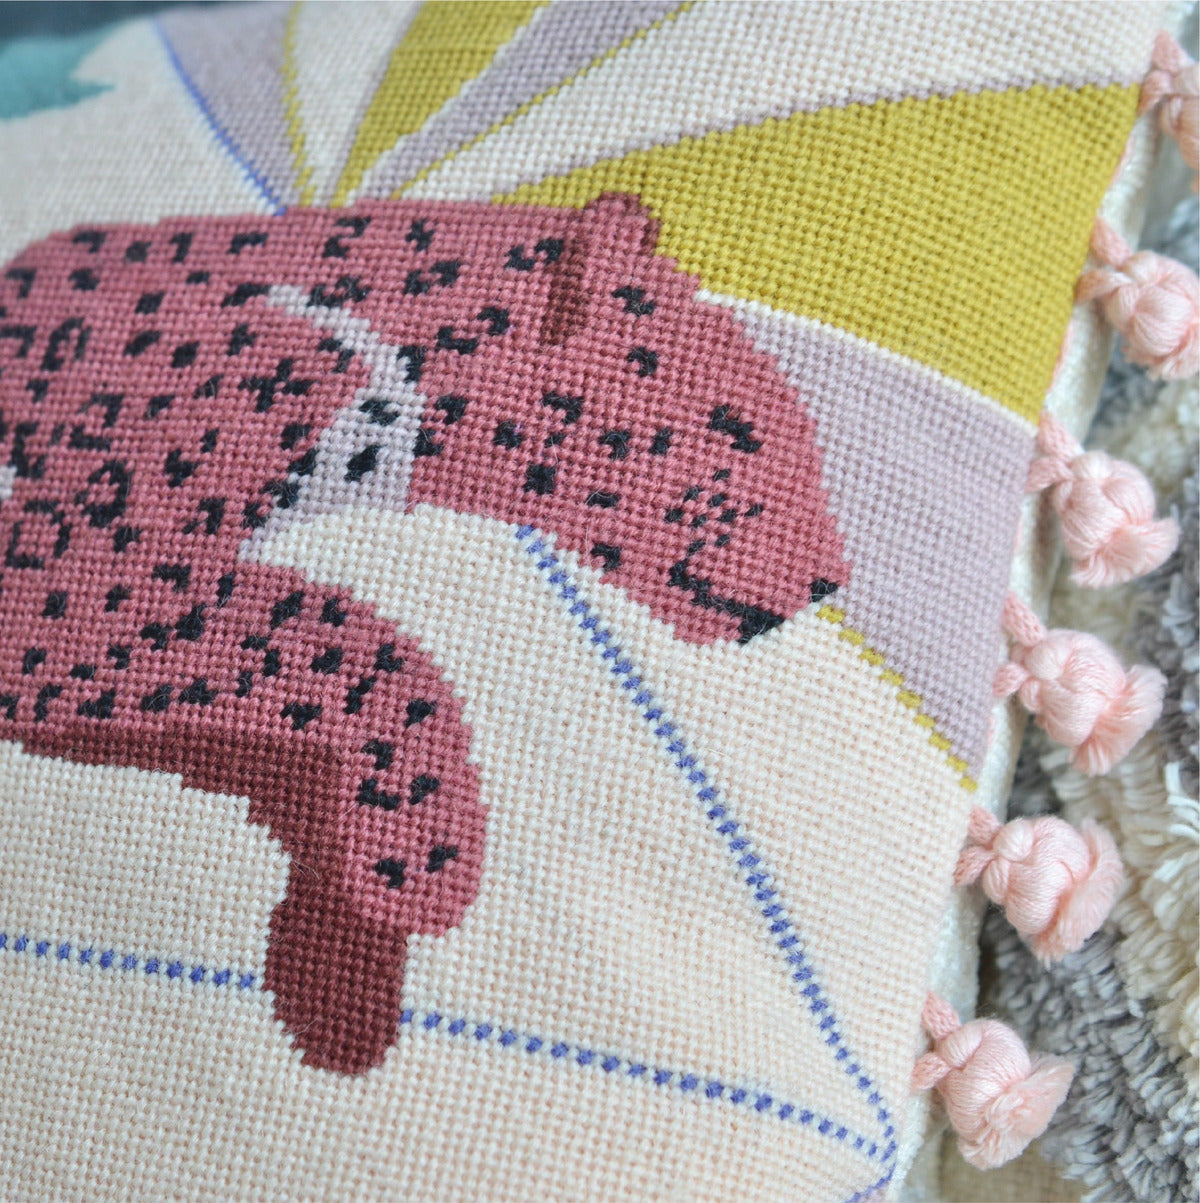 Close-up detail of a modern tapestry kit, showcasing intricate stitching in contemporary patterns and vibrant colors, providing a captivating glimpse into the artistry and craftsmanship of the project.